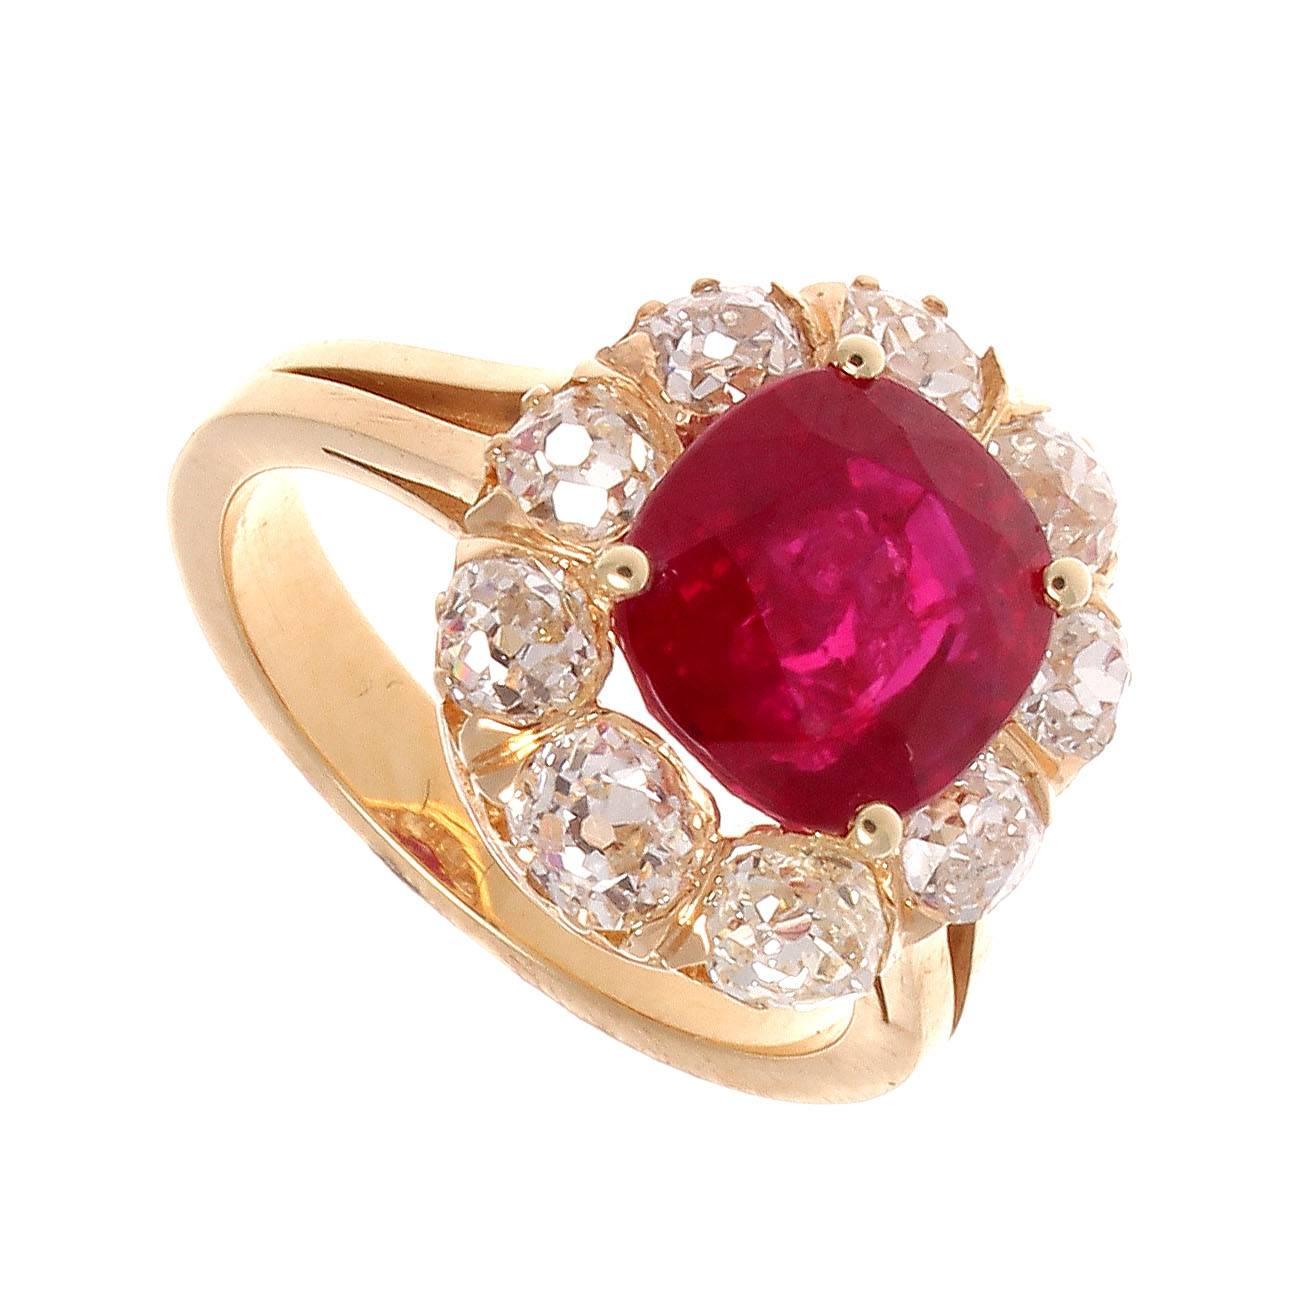 The iconic cluster ring, featuring one of the most sought after gemstones. No heat Burma rubies are rare and this ruby exhibits a sparkling pigeon blood color. The ruby color that is most sought after and that truly defines superior rubies. 

A